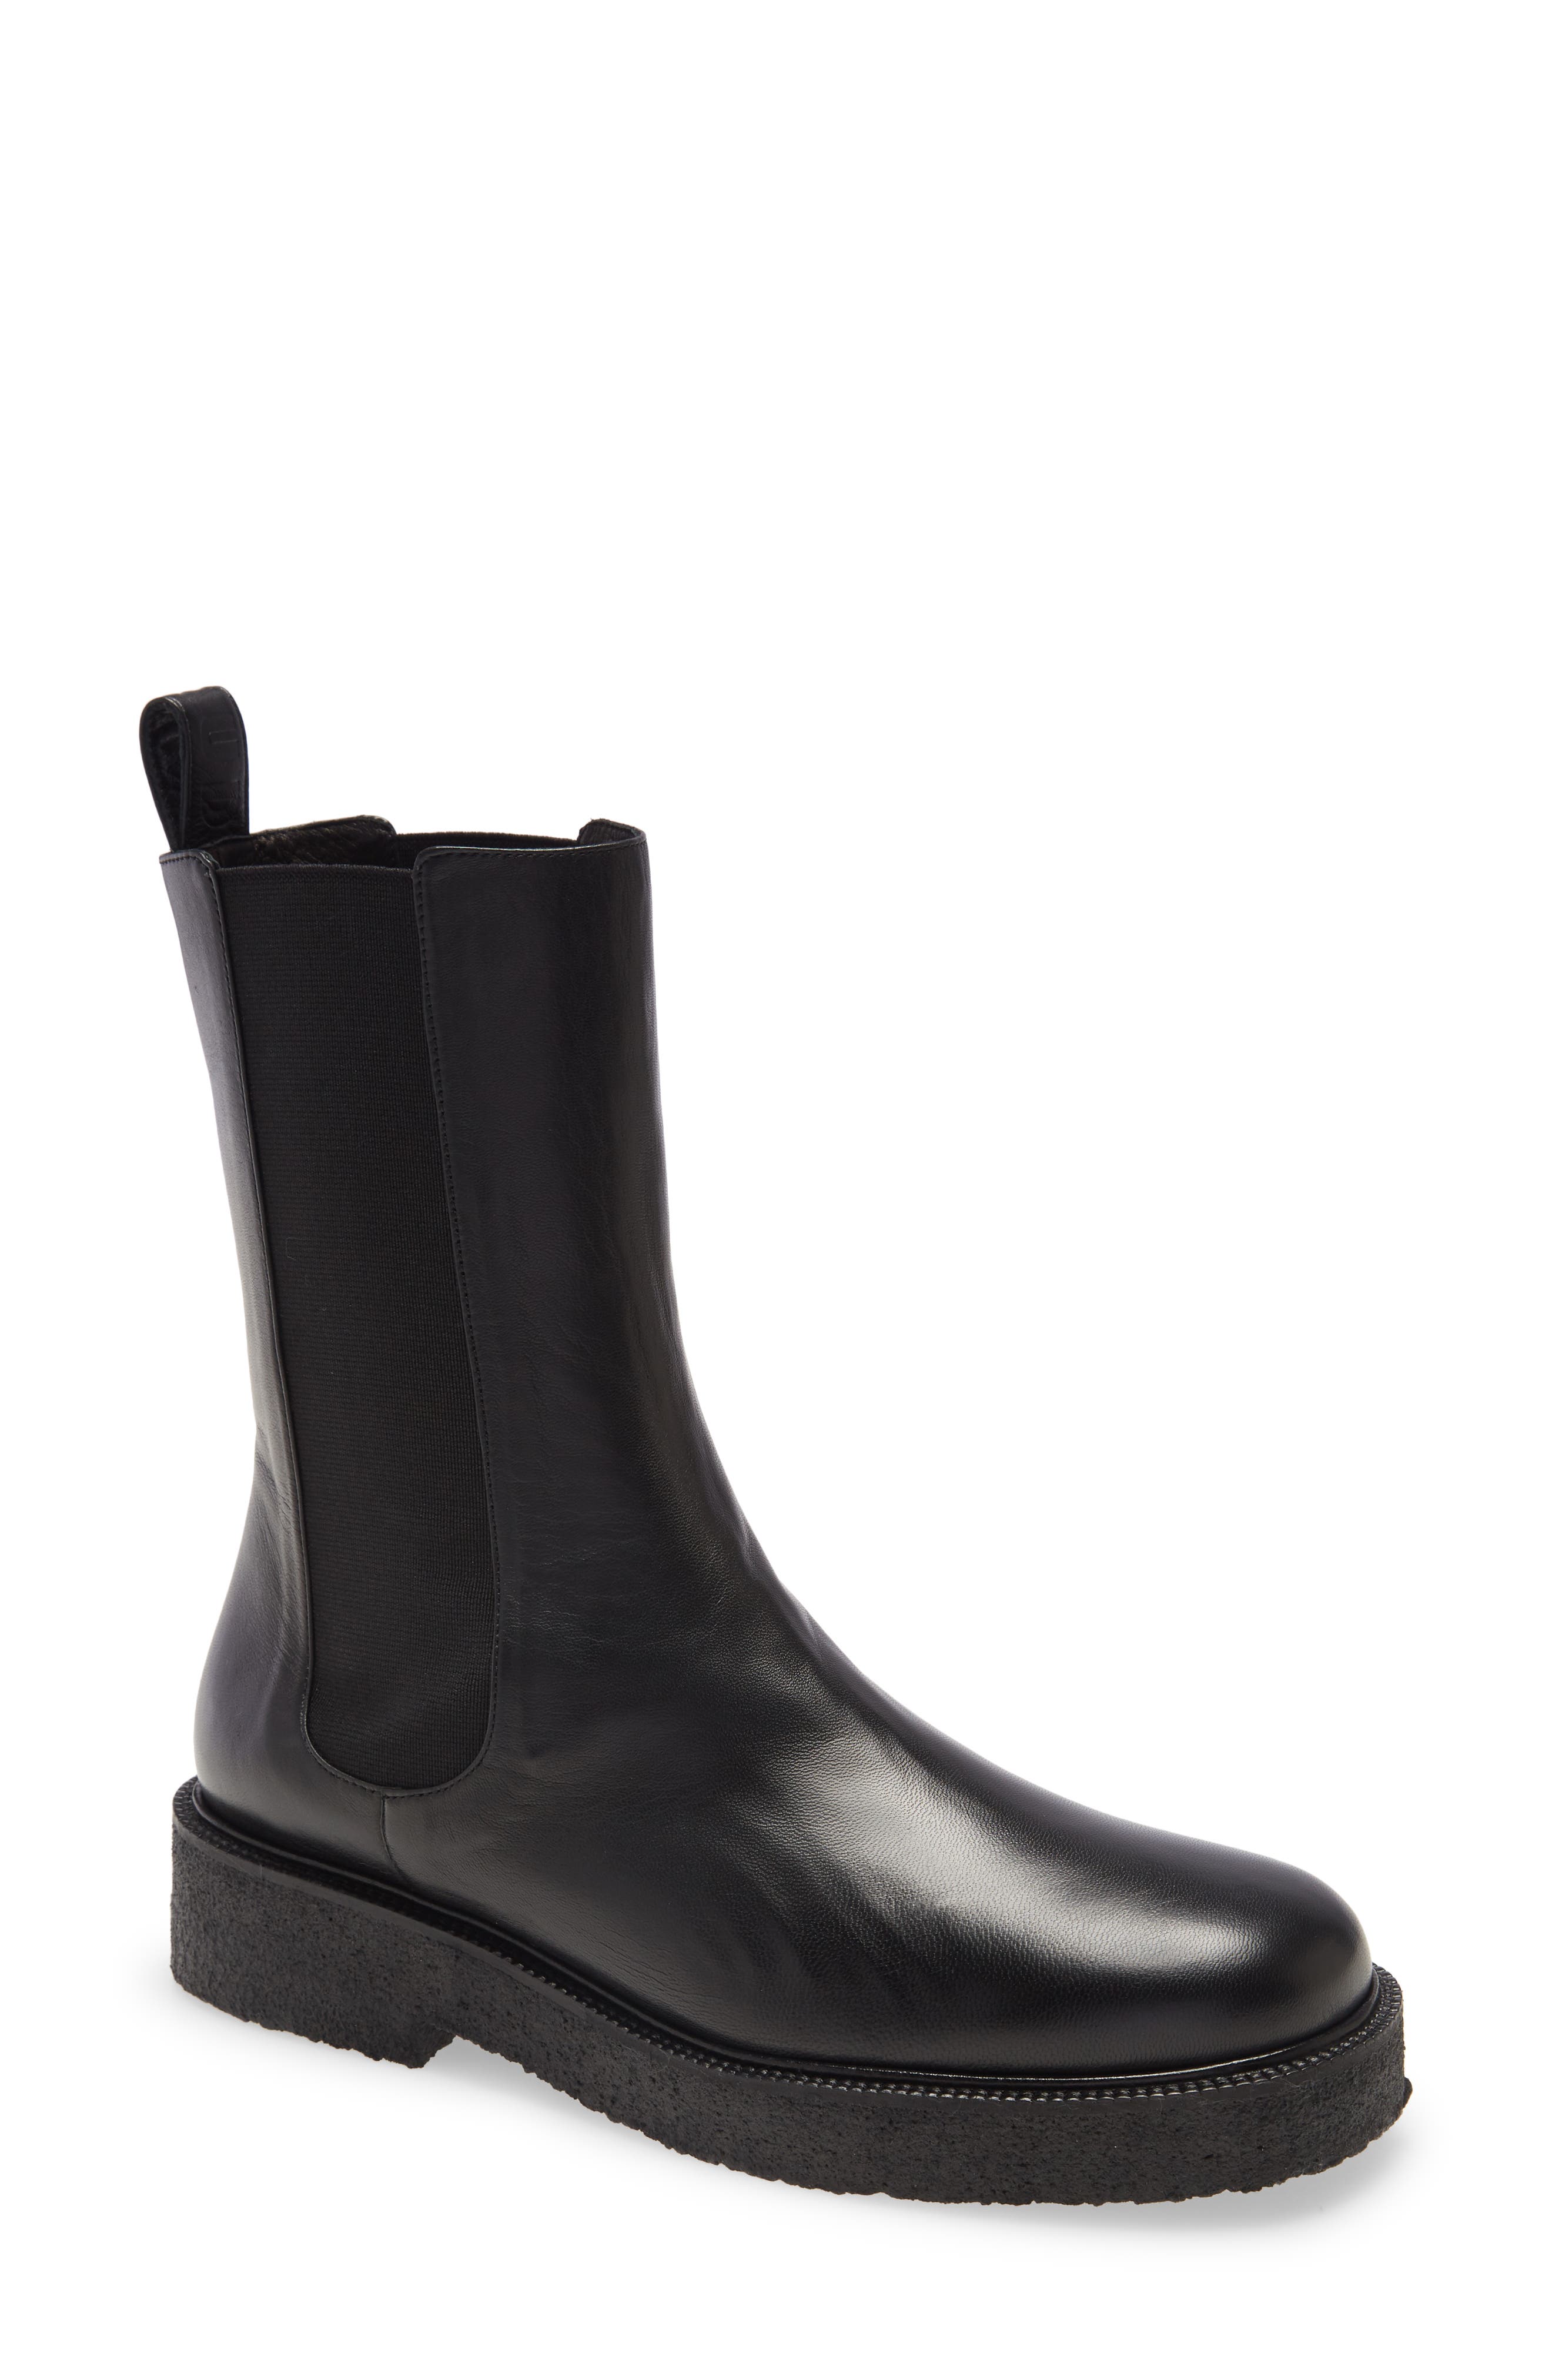 STAUD Palamino Chelsea Boot in Olive/Black at Nordstrom